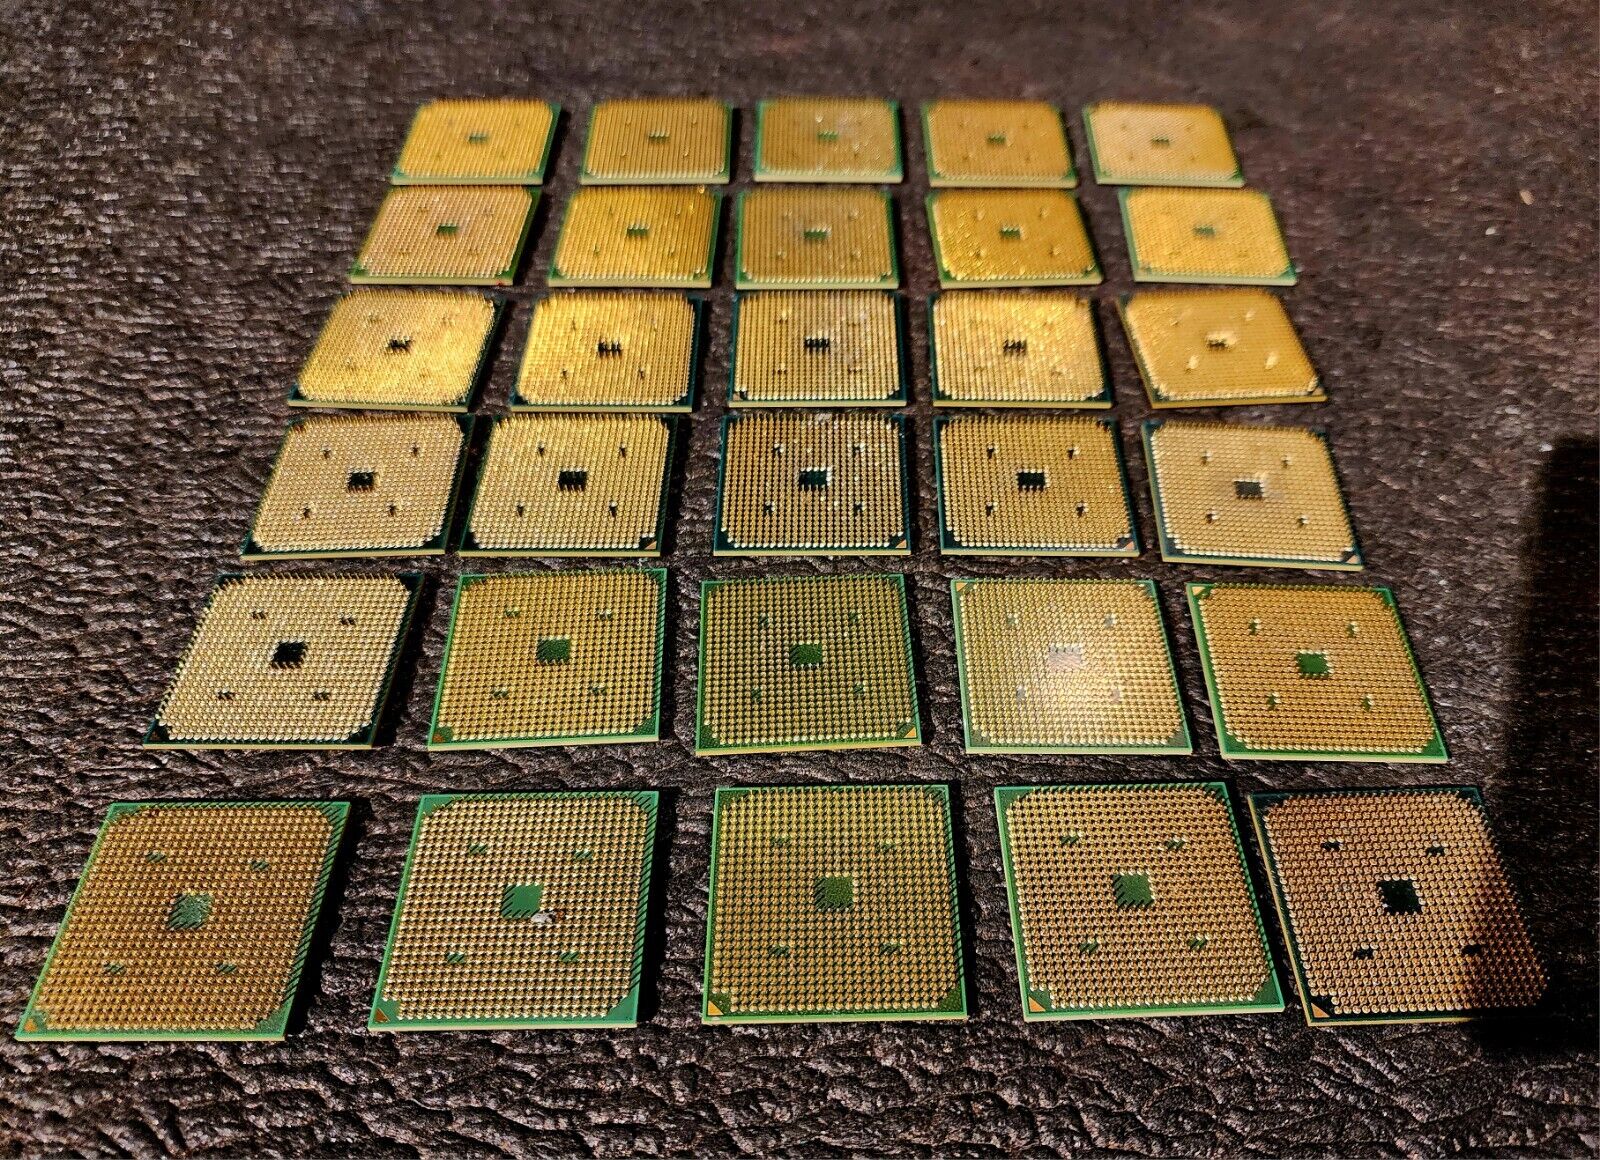 Mixed Lot Of 30 AMD Cpu High Yield Pinned GOLD Processing Chips Scrap